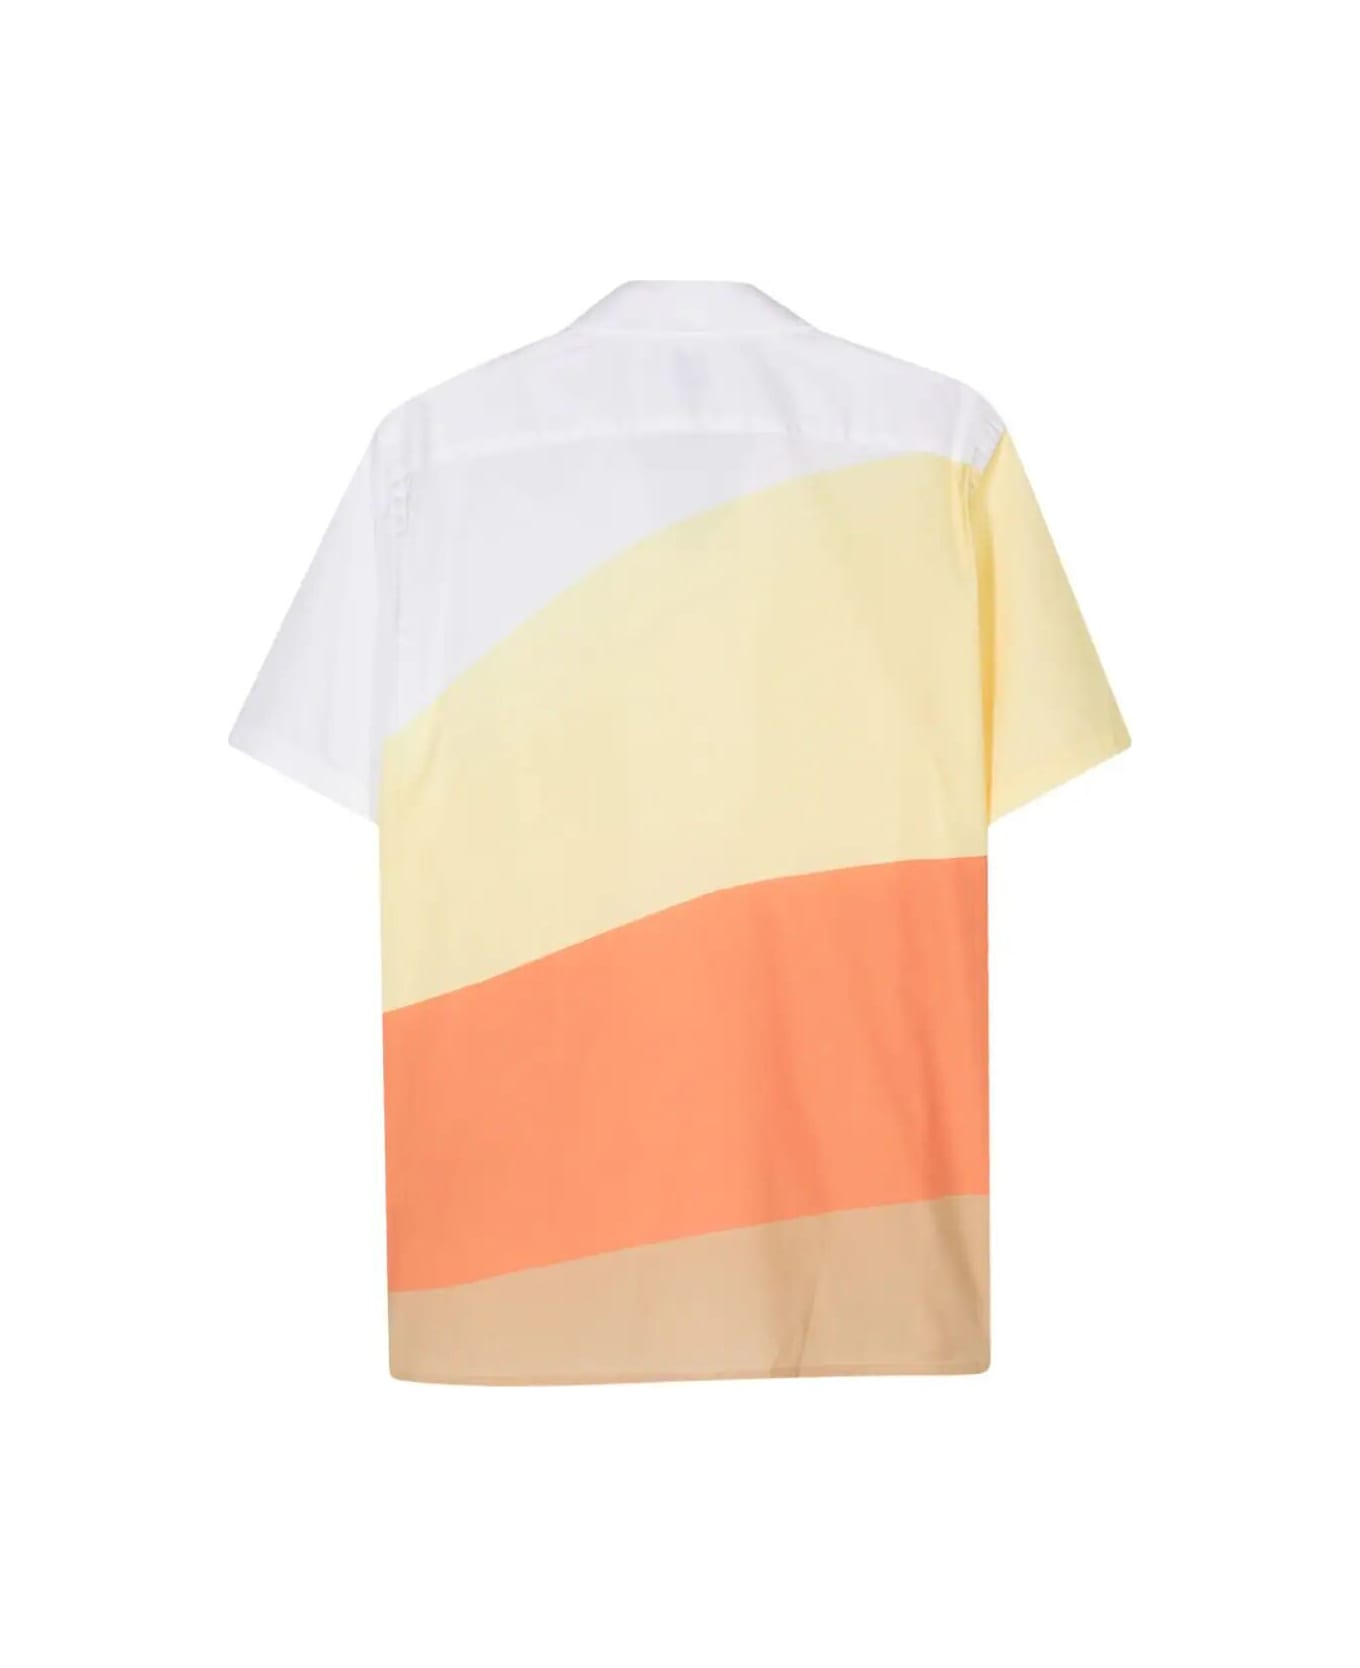 PS by Paul Smith Mens Ss Casual Fit Shirt - Yellows